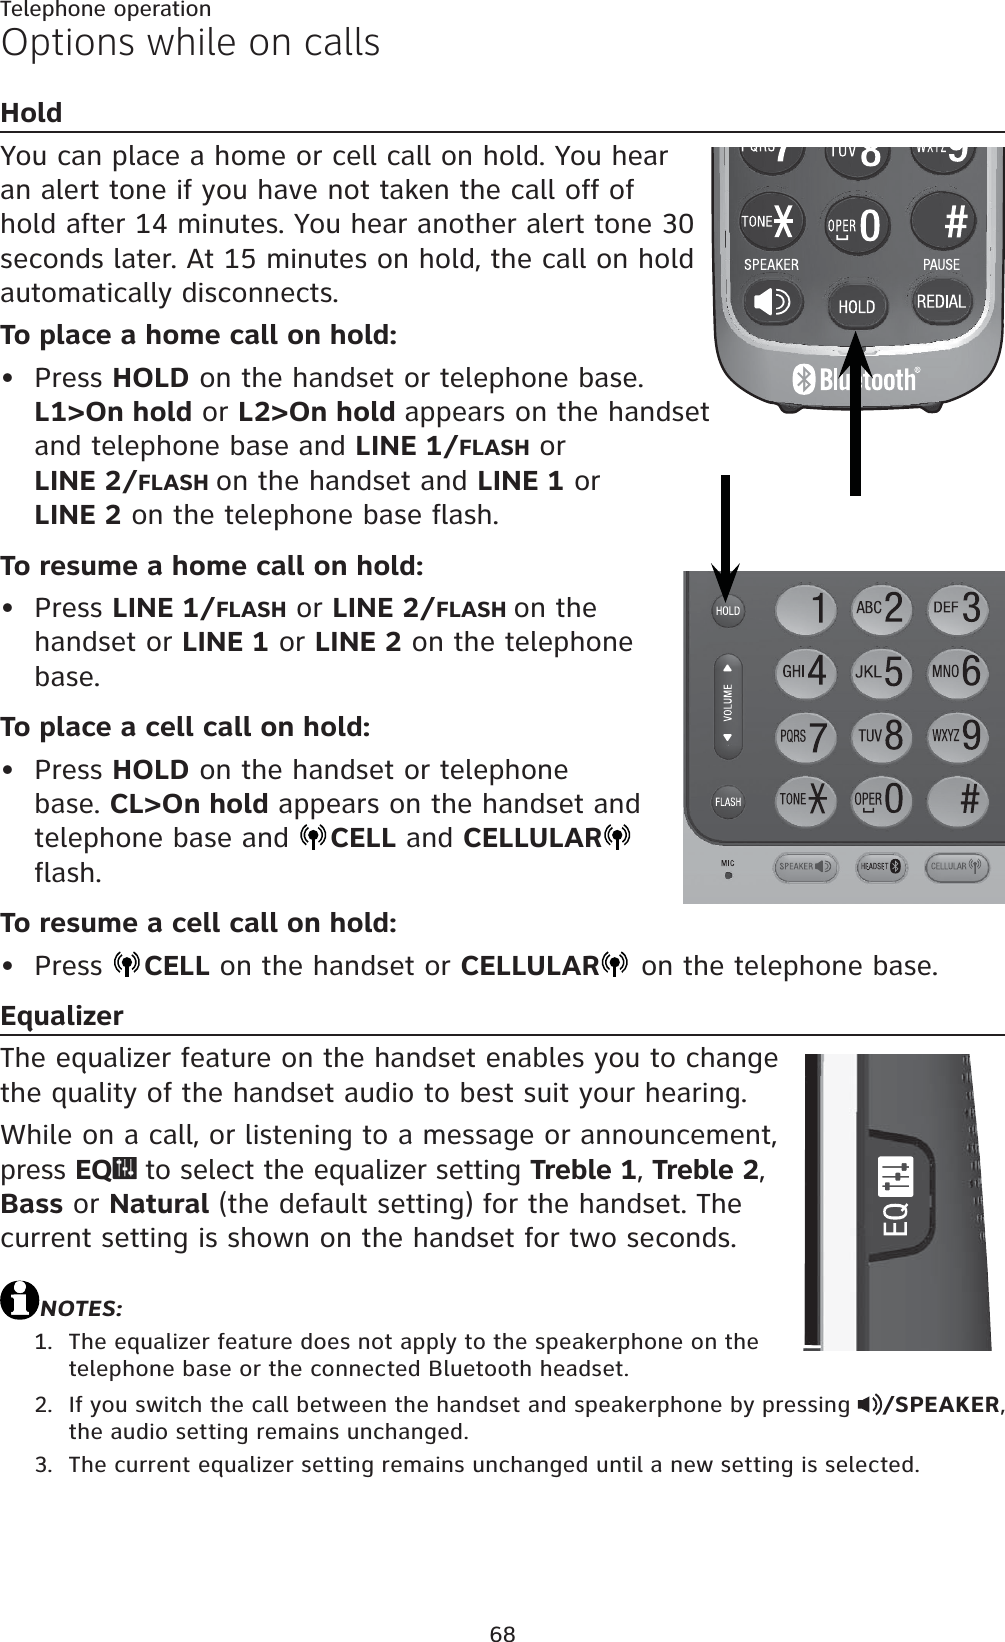 68Telephone operationOptions while on callsHoldYou can place a home or cell call on hold. You hear an alert tone if you have not taken the call off of hold after 14 minutes. You hear another alert tone 30 seconds later. At 15 minutes on hold, the call on hold automatically disconnects.To place a home call on hold:Press HOLD on the handset or telephone base. L1&gt;On hold or L2&gt;On hold appears on the handset and telephone base and LINE 1/FLASH or LINE 2/FLASH on the handset and LINE 1 or LINE 2 on the telephone base flash.To resume a home call on hold:Press LINE 1/FLASH or LINE 2/FLASH on the handset or LINE 1 or LINE 2 on the telephone base.To place a cell call on hold:Press HOLD on the handset or telephone base. CL&gt;On hold appears on the handset and telephone base and  CELL and CELLULARflash.To resume a cell call on hold:Press  CELL on the handset or CELLULAR  on the telephone base.EqualizerThe equalizer feature on the handset enables you to change the quality of the handset audio to best suit your hearing.While on a call, or listening to a message or announcement, press EQ  to select the equalizer setting Treble 1, Treble 2,Bass or Natural (the default setting) for the handset. The current setting is shown on the handset for two seconds.NOTES:The equalizer feature does not apply to the speakerphone on the telephone base or the connected Bluetooth headset.If you switch the call between the handset and speakerphone by pressing  /SPEAKER,the audio setting remains unchanged.The current equalizer setting remains unchanged until a new setting is selected.••••1.2.3.